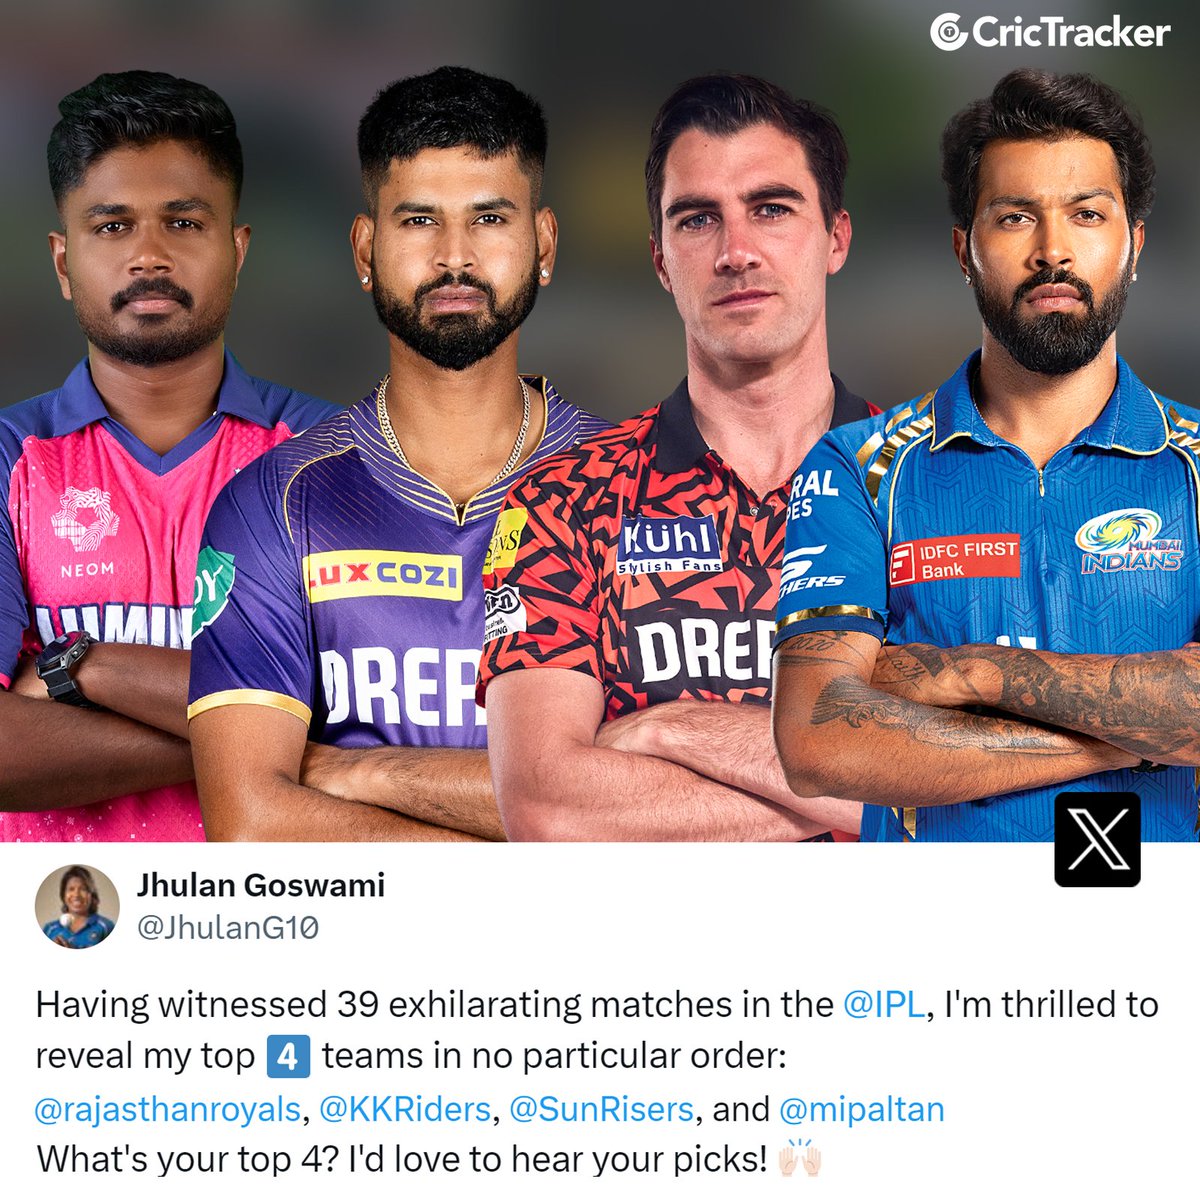 Agree with Jhulan Goswami?

Comment down your top 4 teams👇